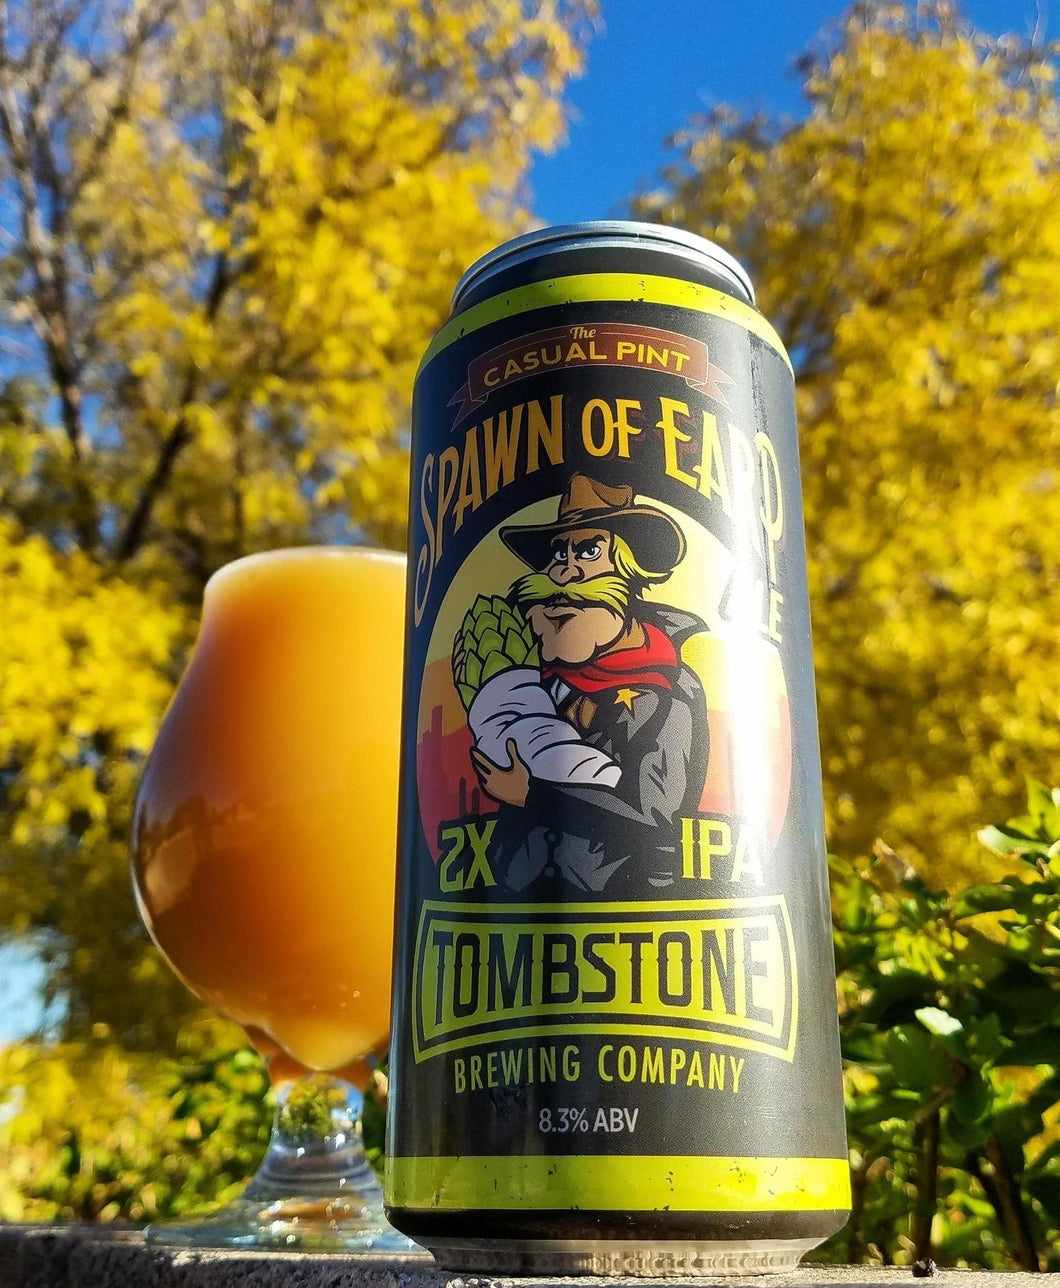 Spawn of Earp Double IPA - Tombstone Brewing - 16 oz can